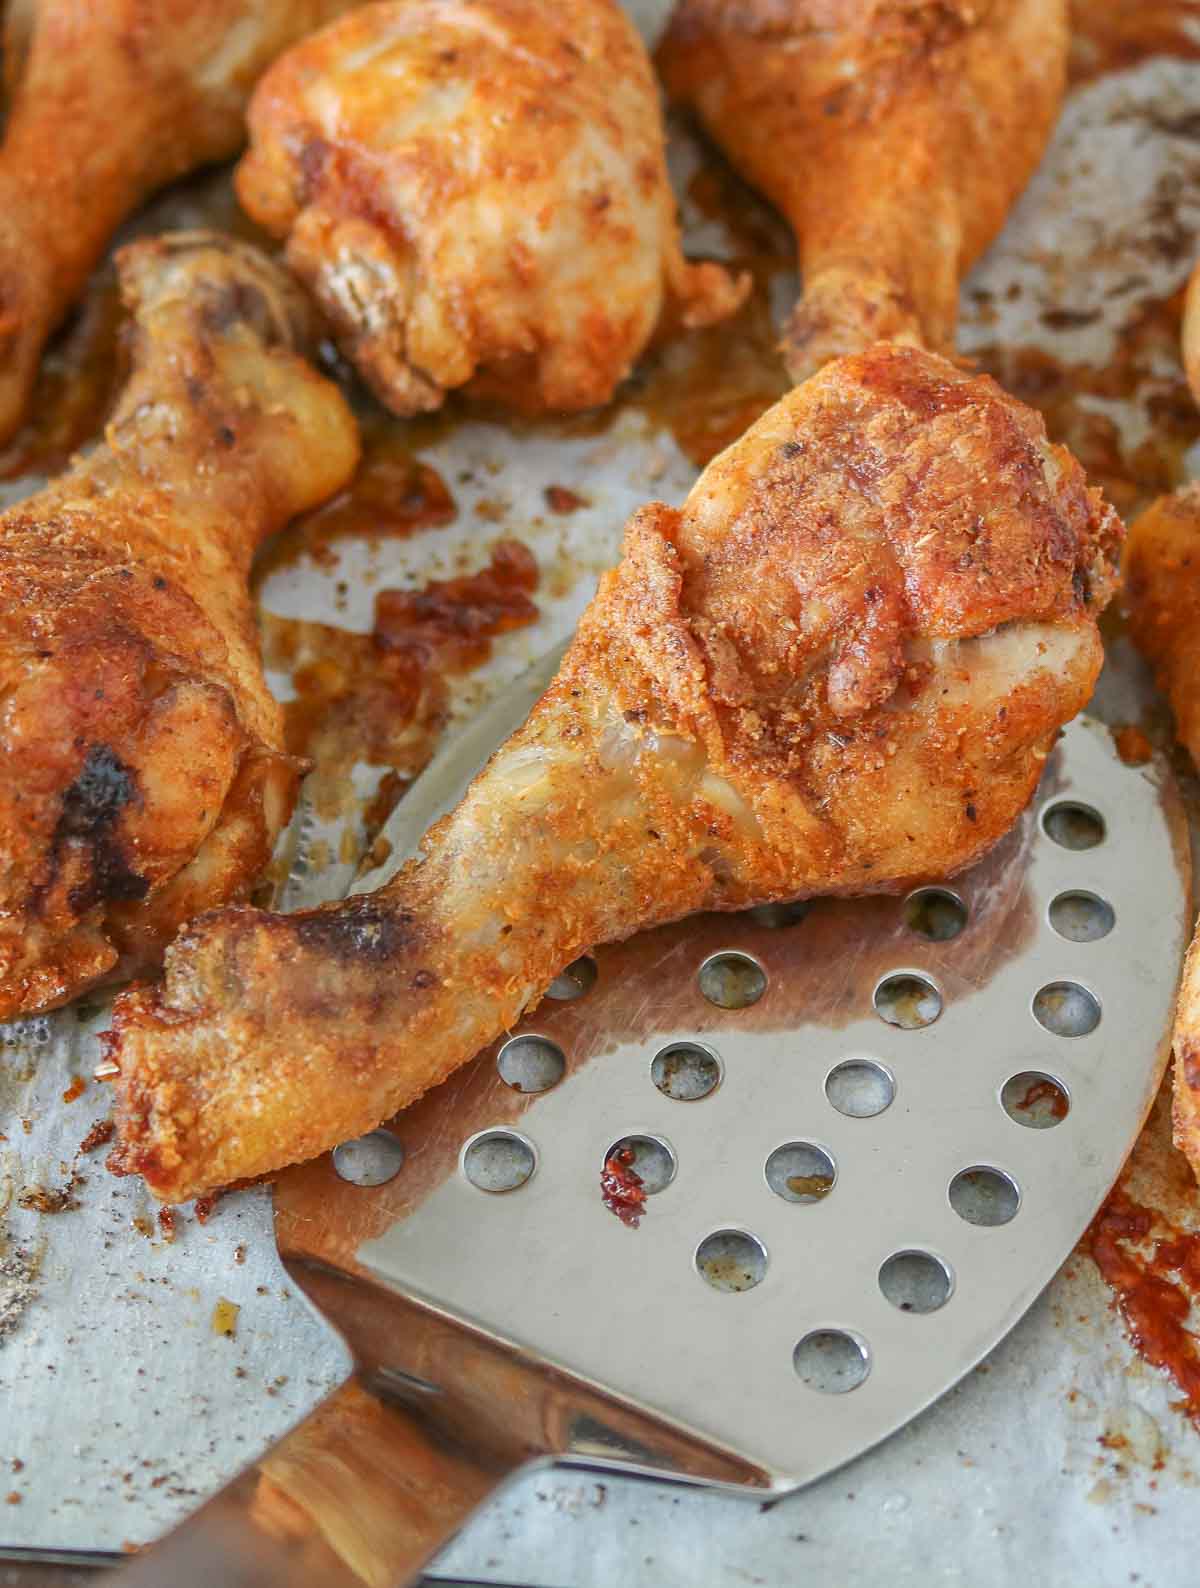 Spatula serving a chicken drumstick from a parchment paper-lined sheet pan.